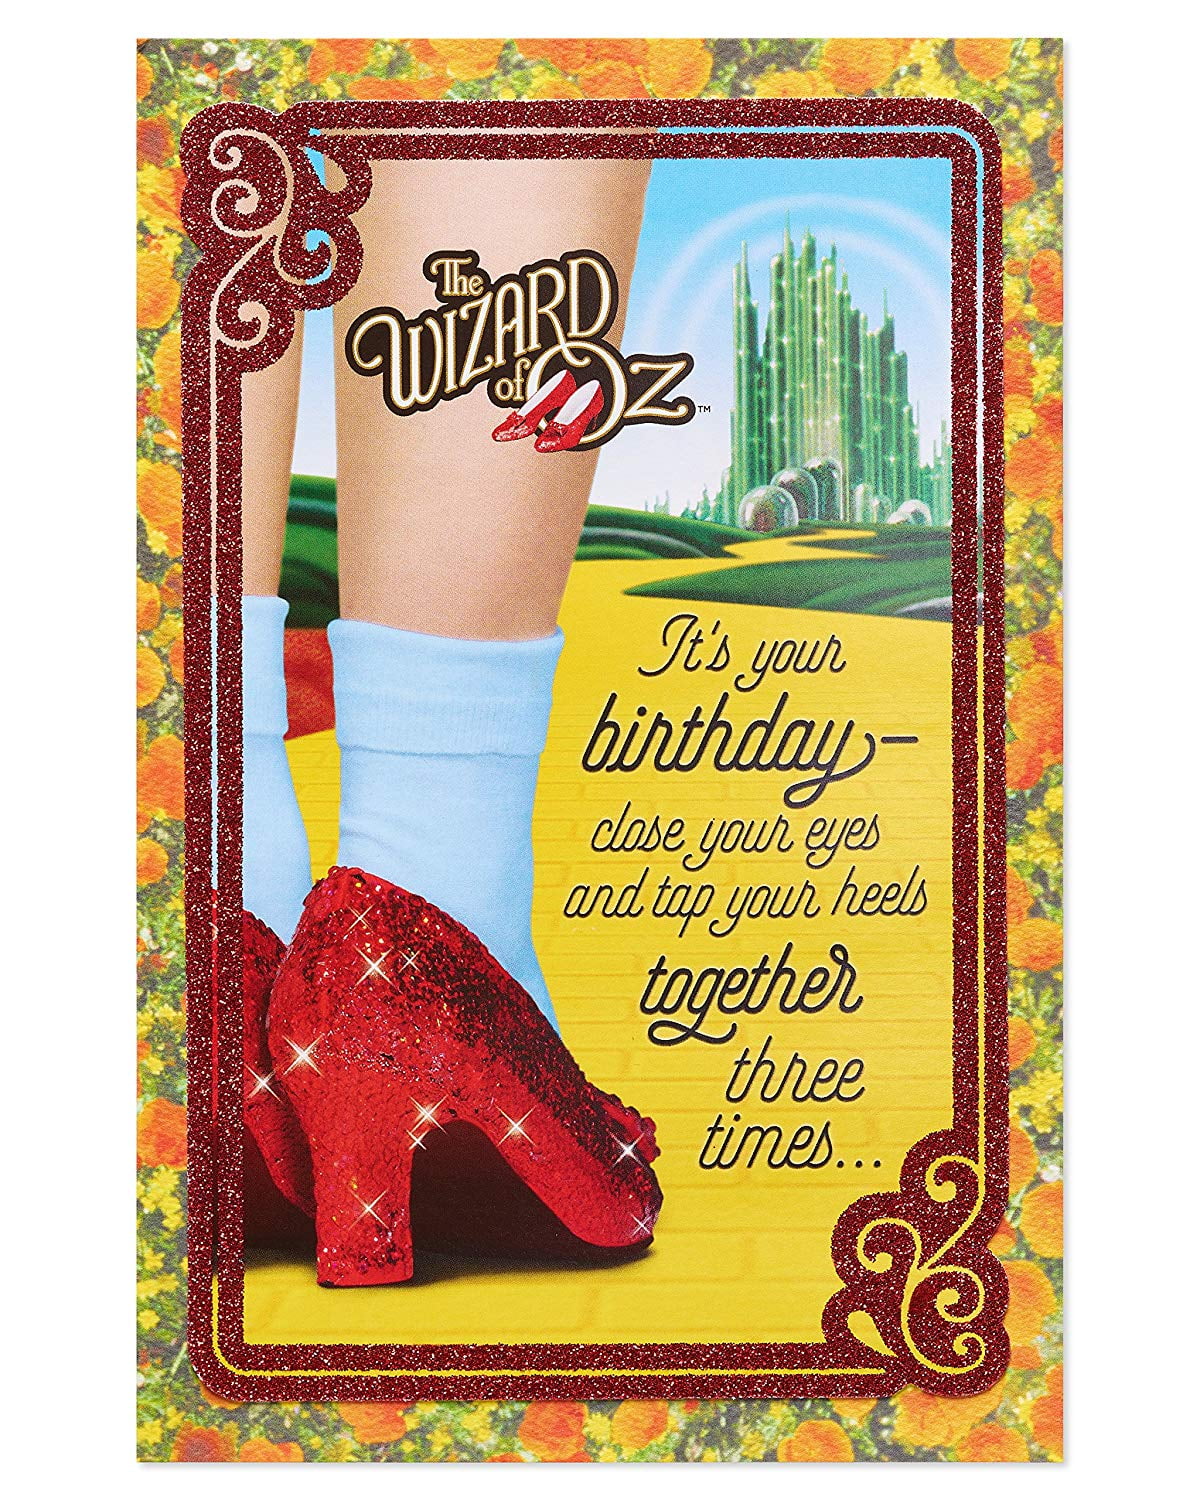 American Greetings Funny The Wizard Of Oz Birthday Card With Glitter 